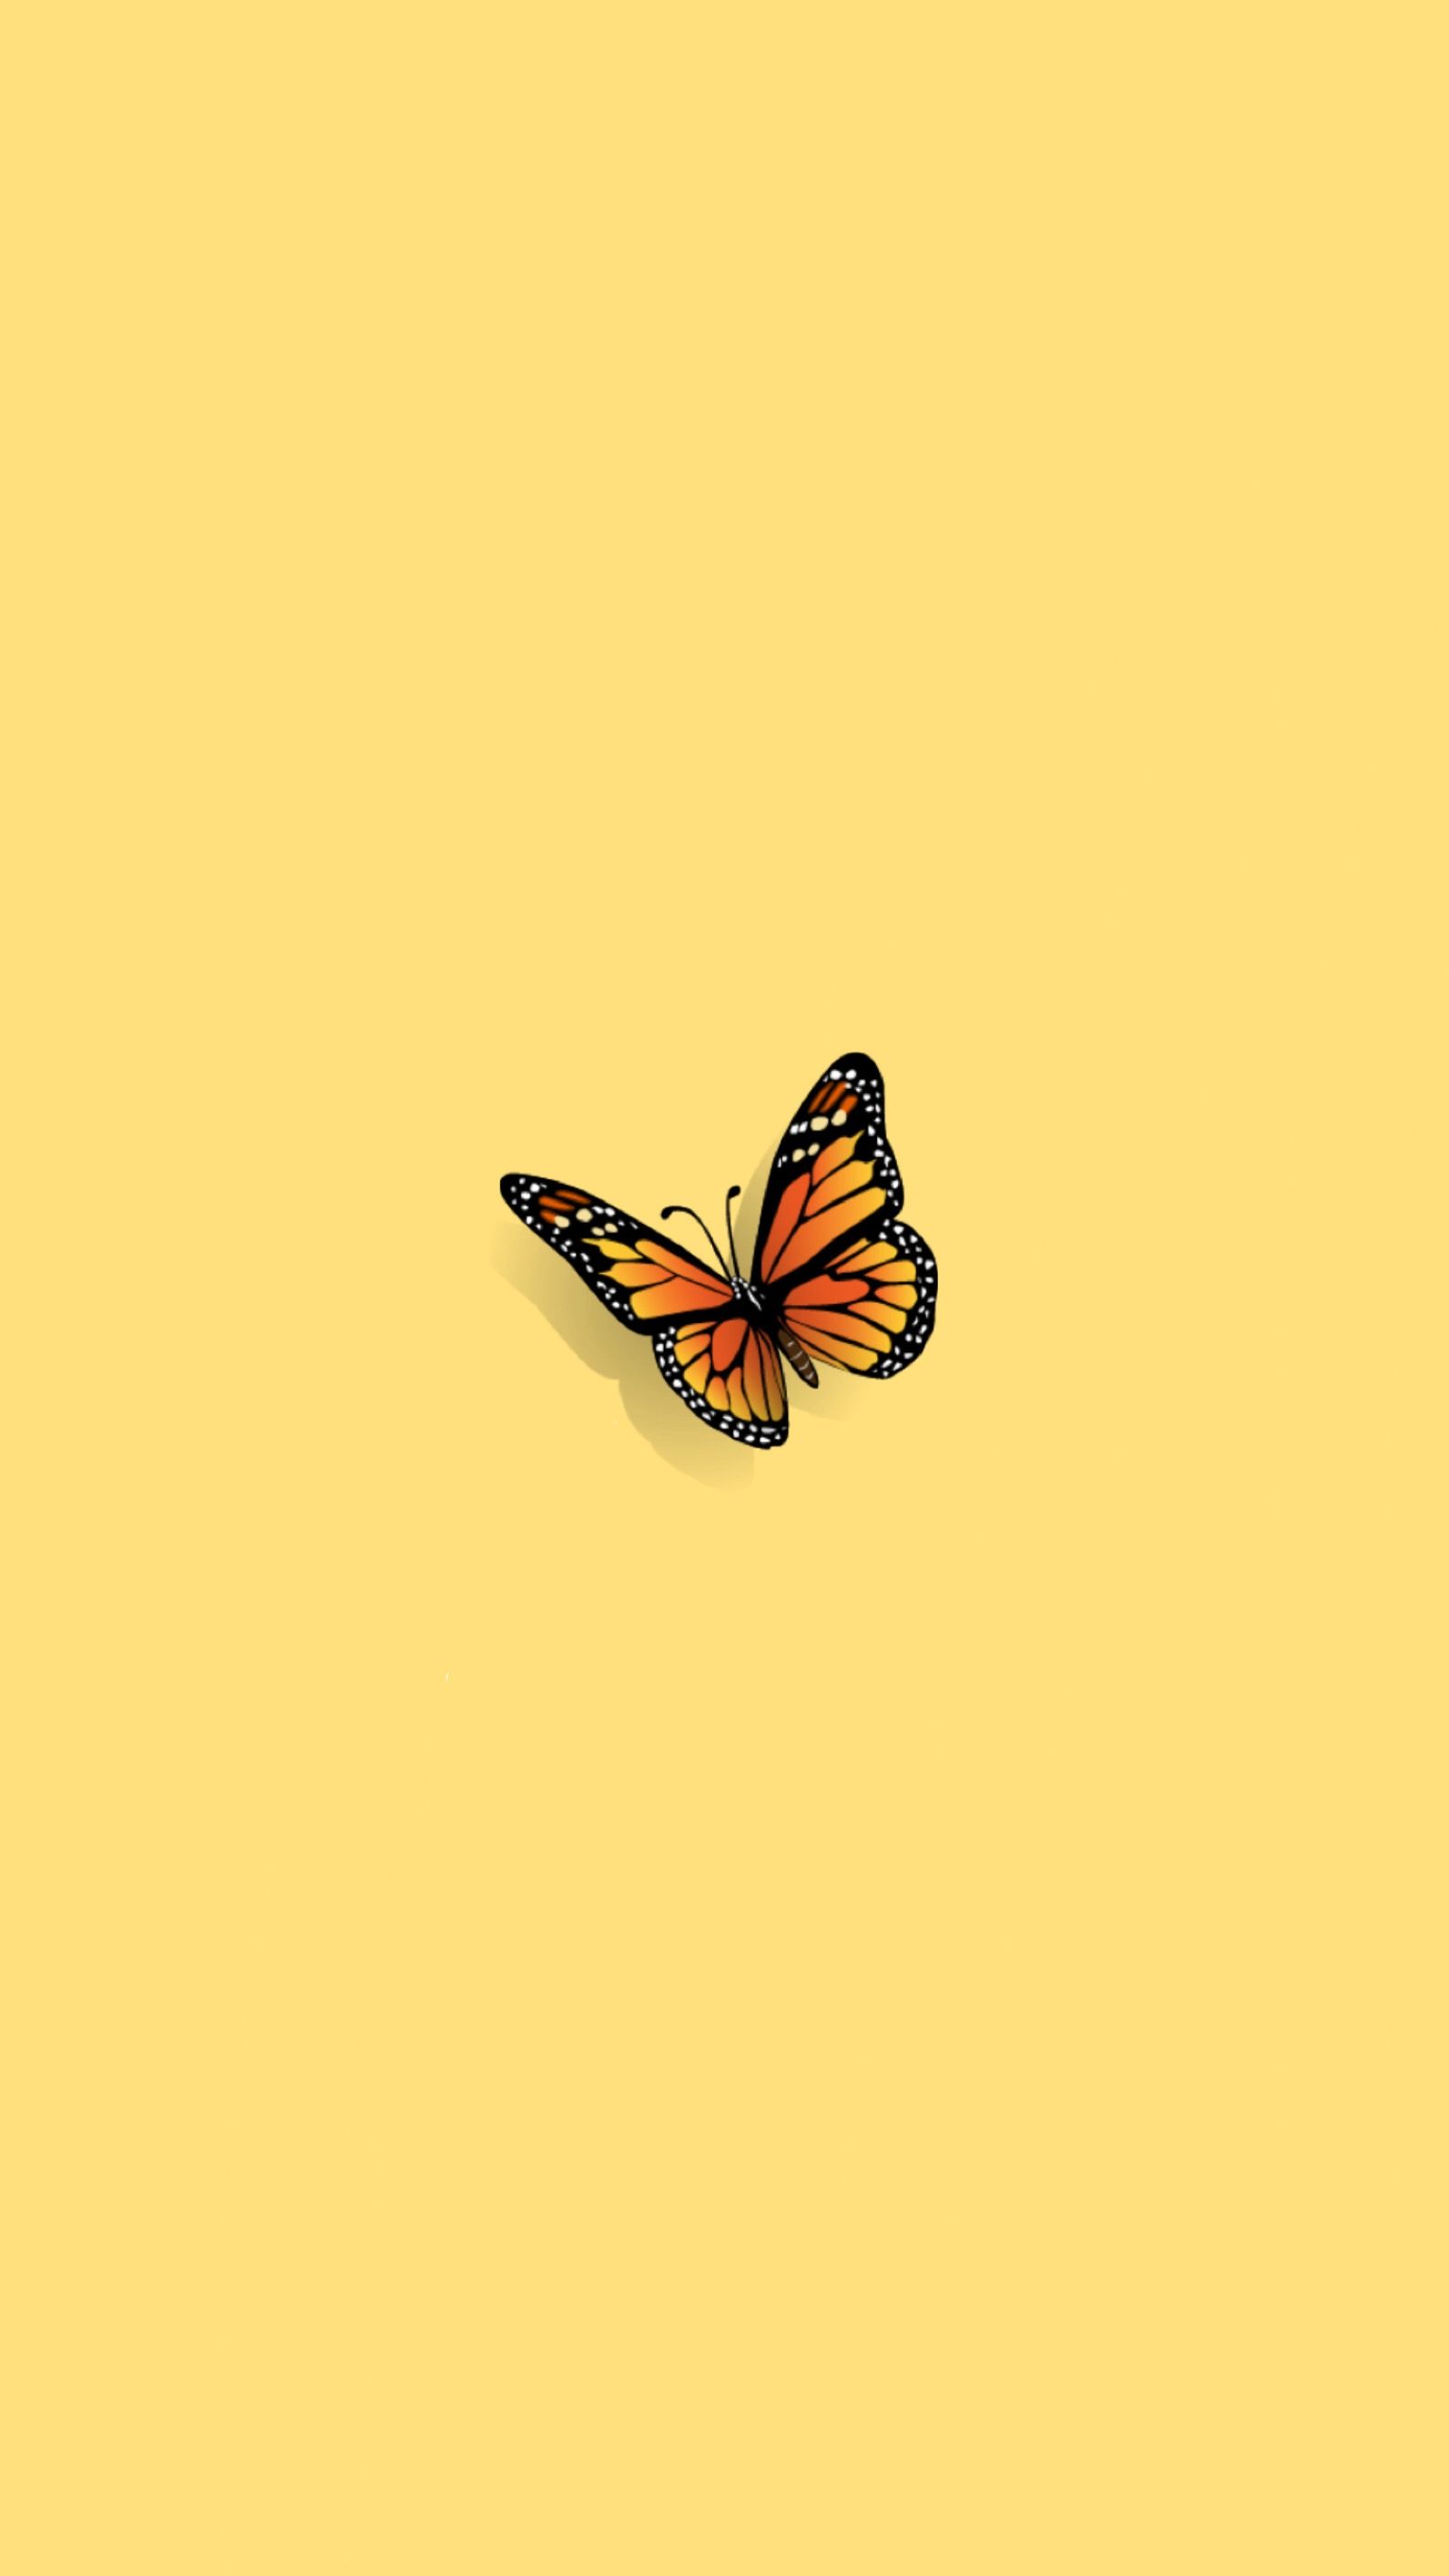 Aesthetic butterfly wallpaper for phone with a yellow background - Butterfly